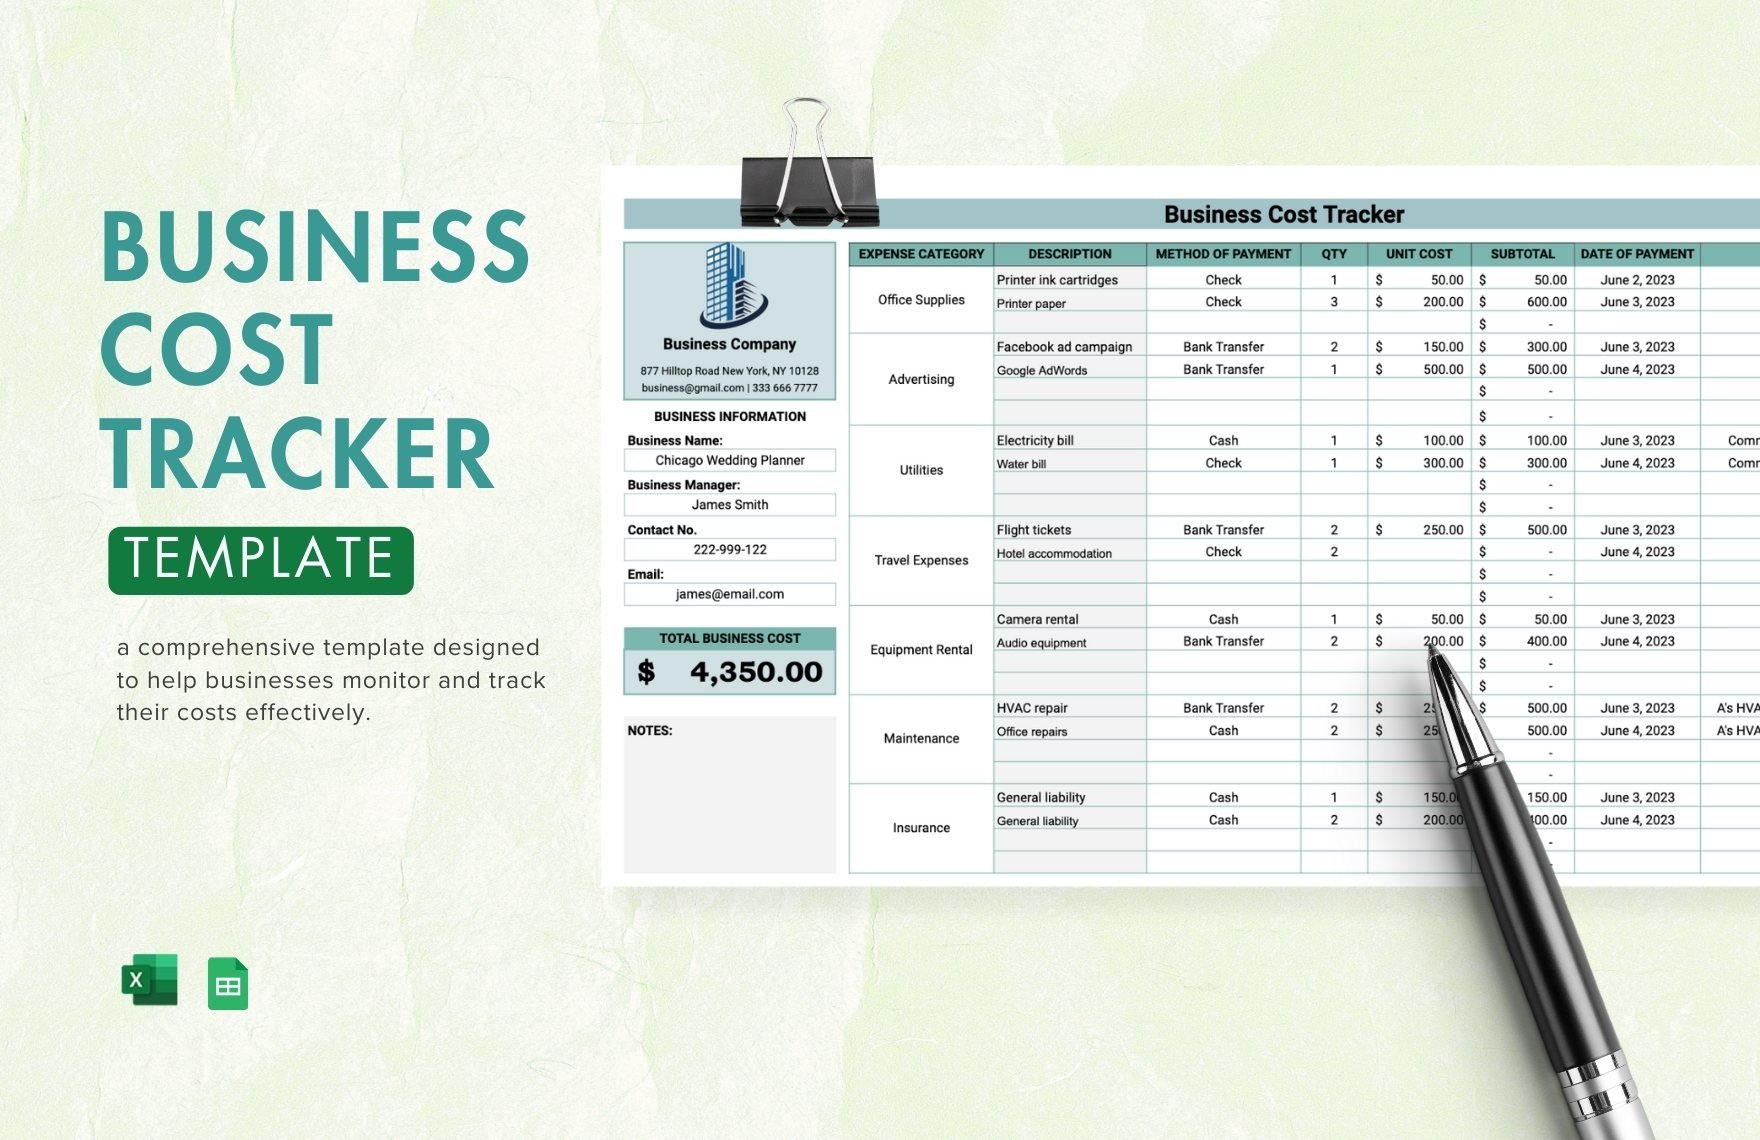 Business Cost Tracker Template in Excel, Google Sheets